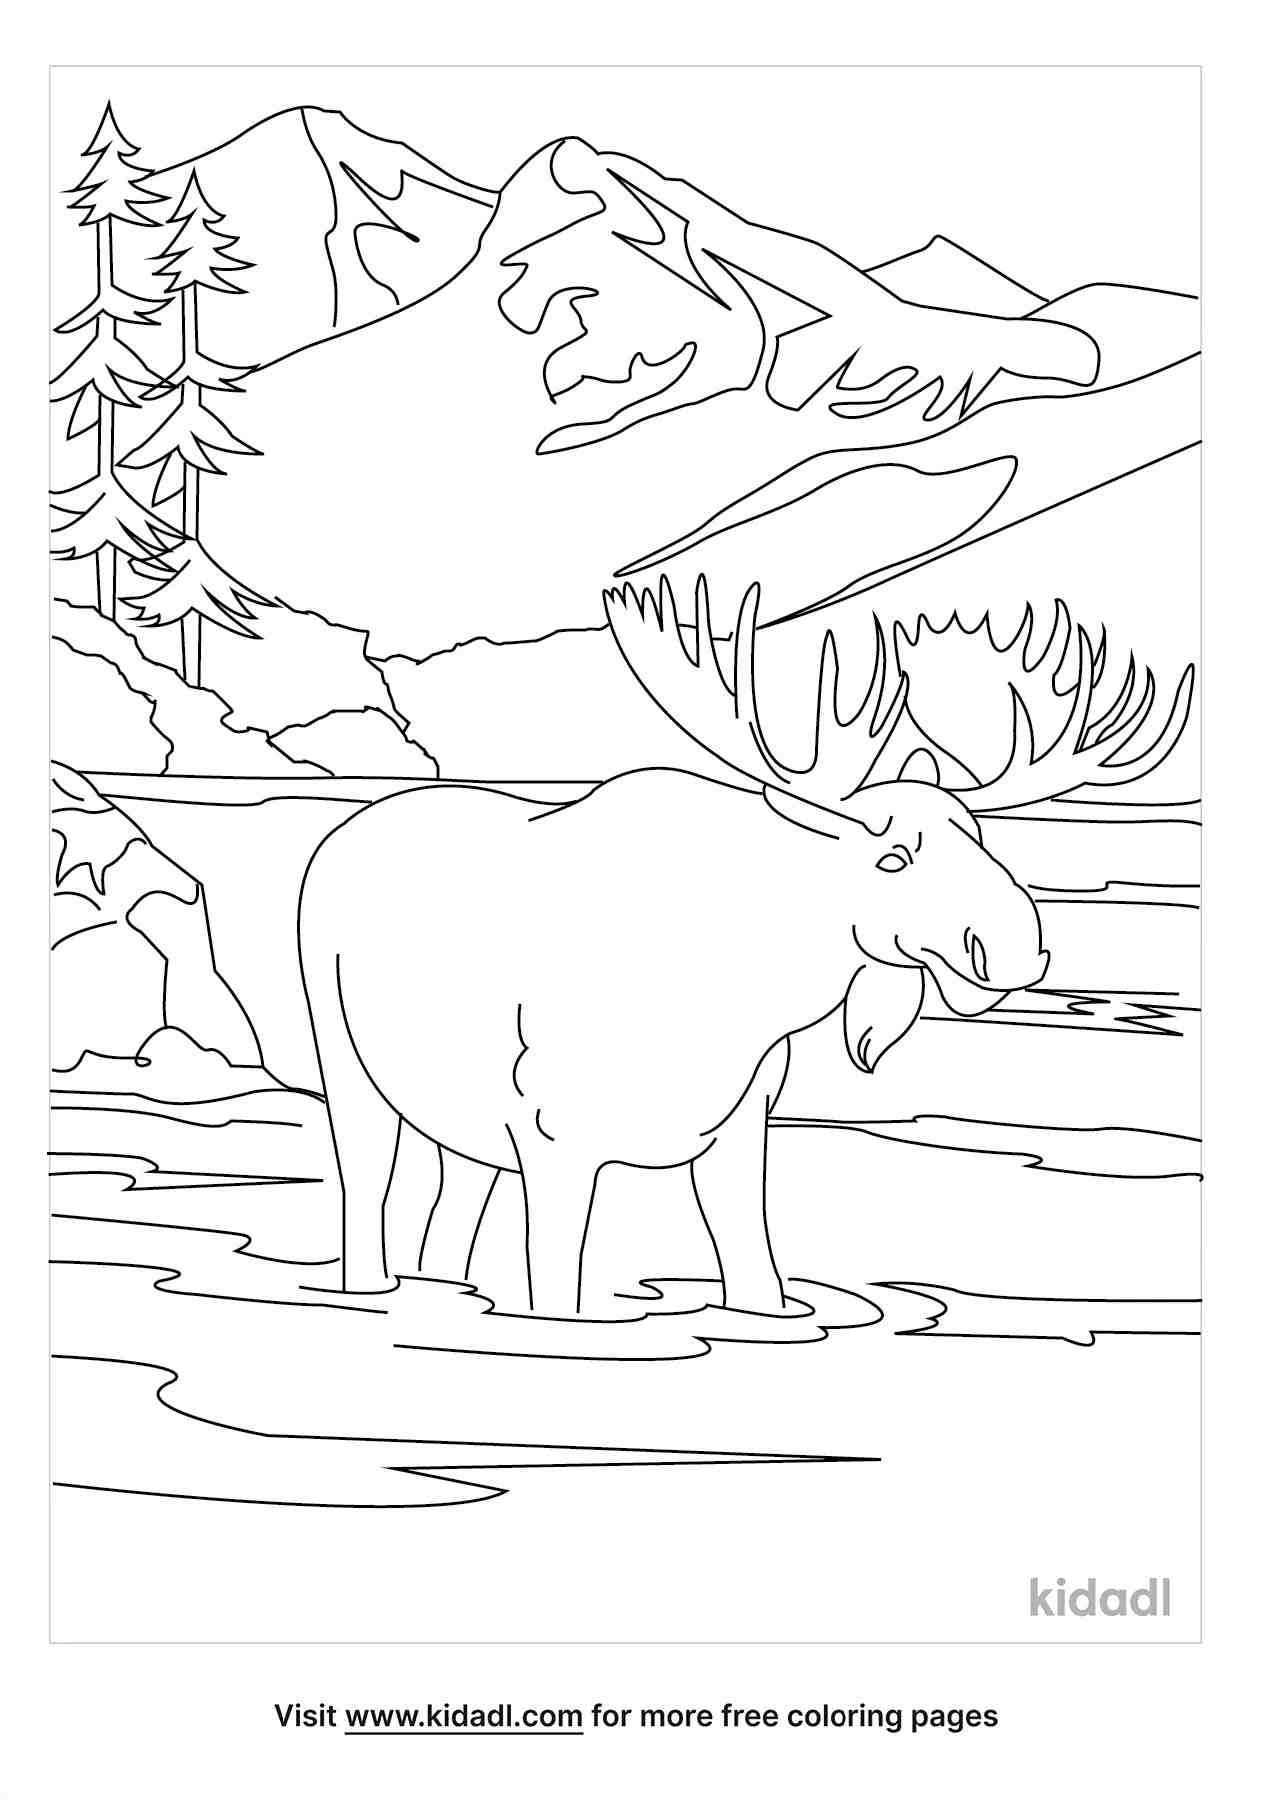 Amazing Denali facts and coloring pages for kids.